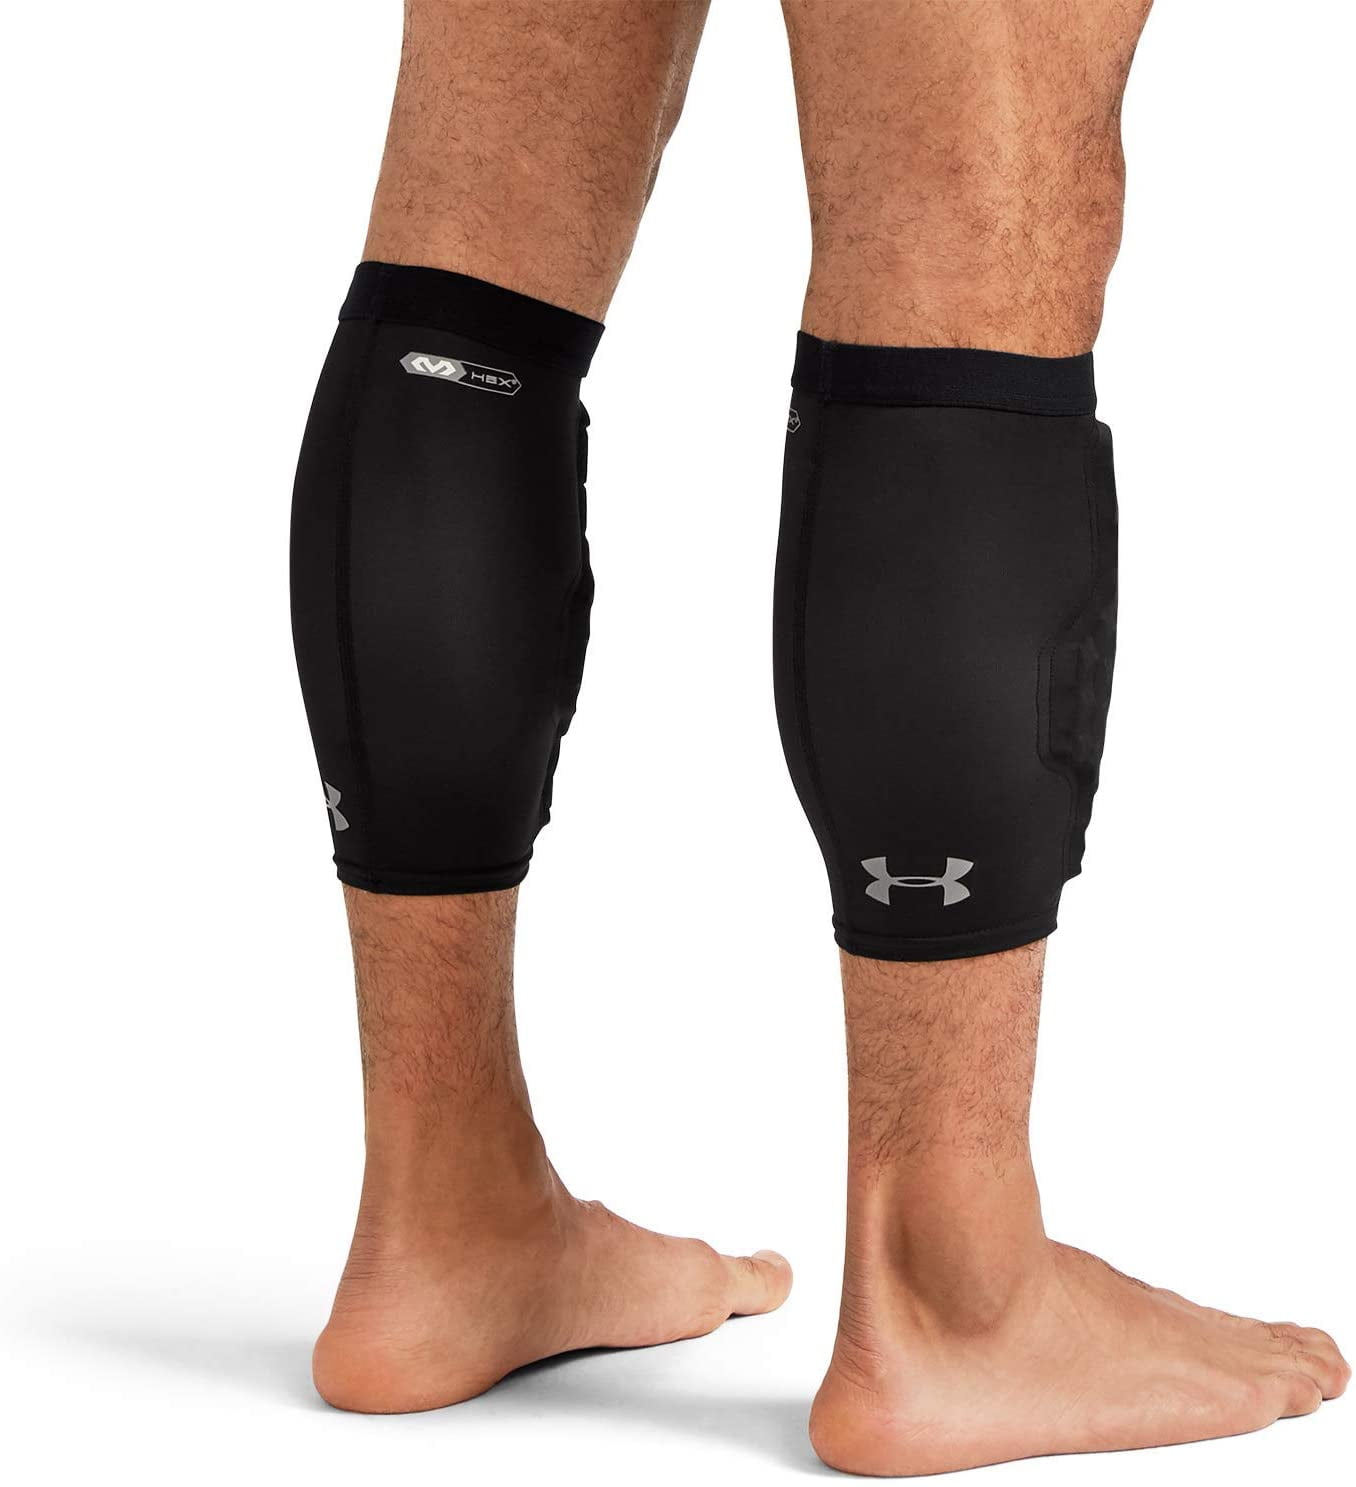 Multipurpose Compression and HEX Padding for Protection Under Armour Elbow / Knee / Shin Sleeve with Pads Football Coderas de Proteccion 1 Pair Active Wear for Basketball Tennis & Weightlifting 